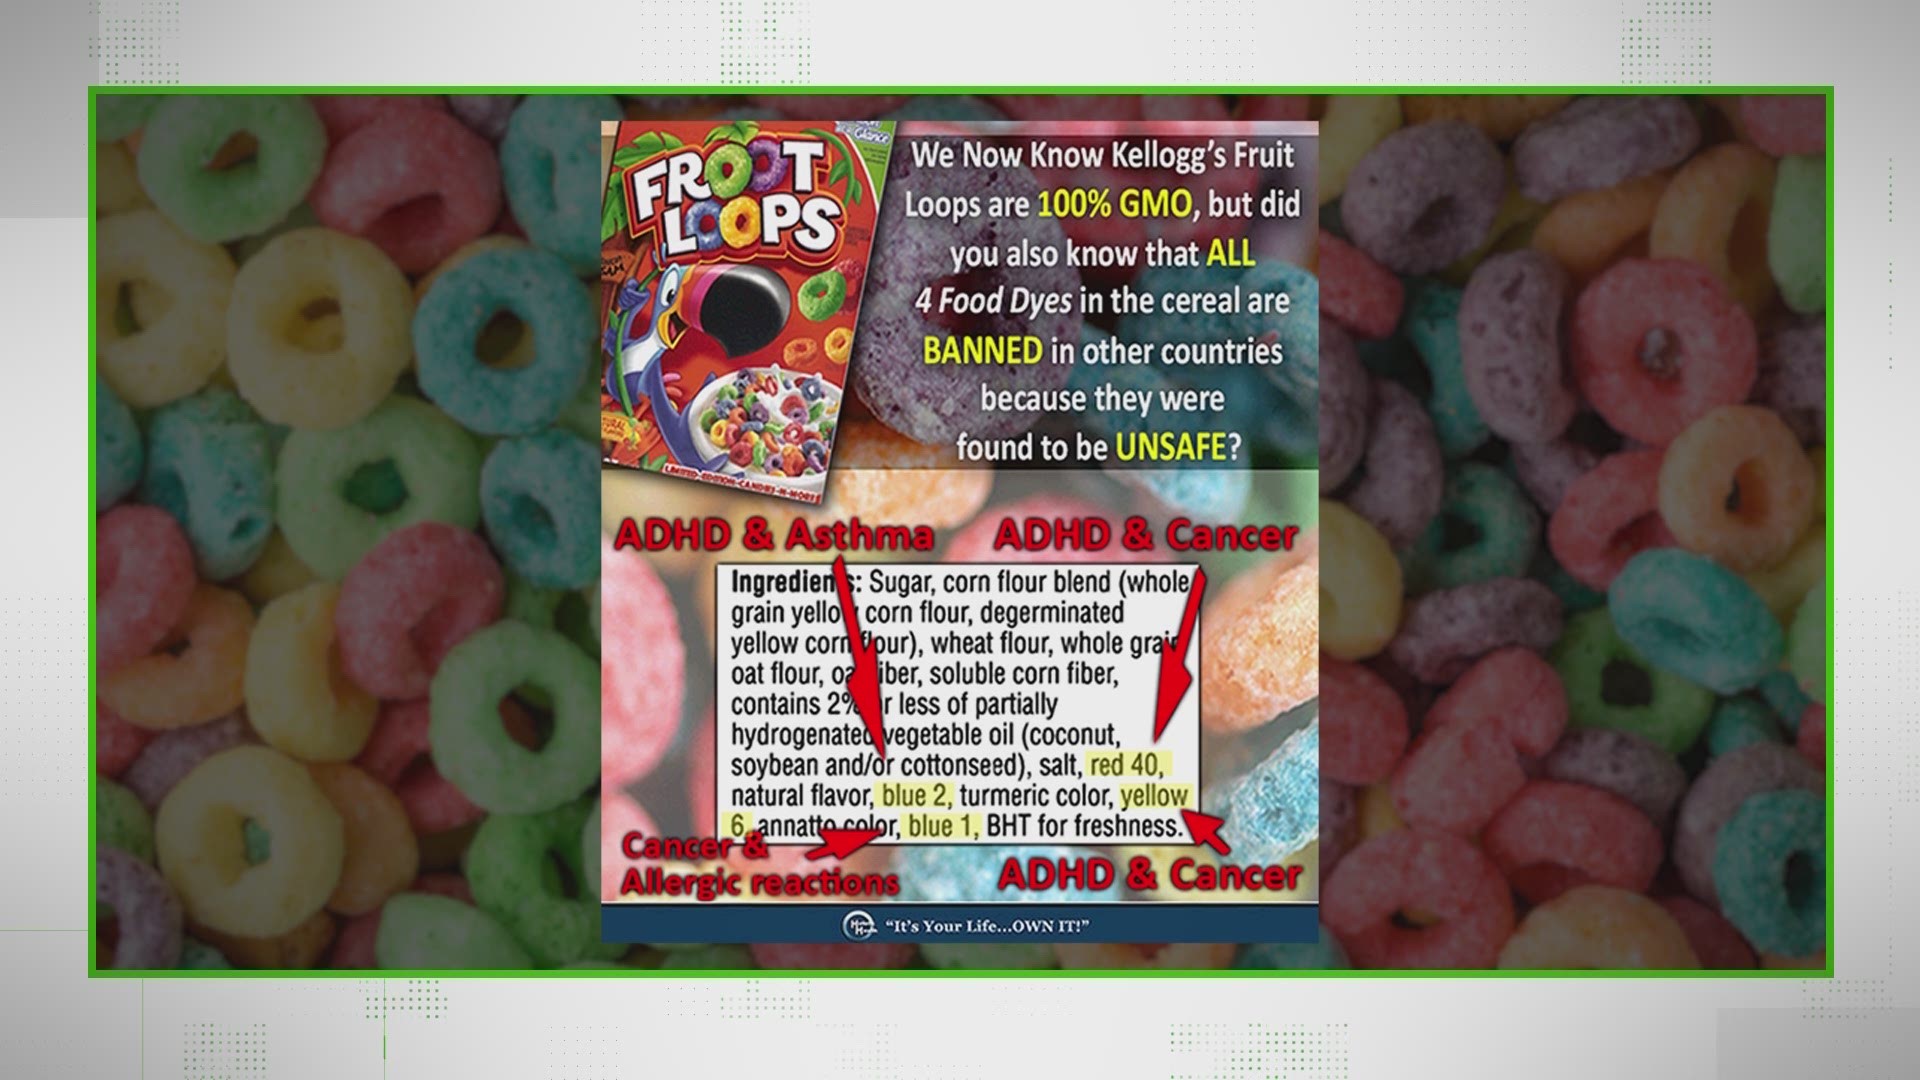 A simple online photo is making some frightening claims about Froot Loops dyes. But our VERIFY team found the cereal claim has some serious problems.